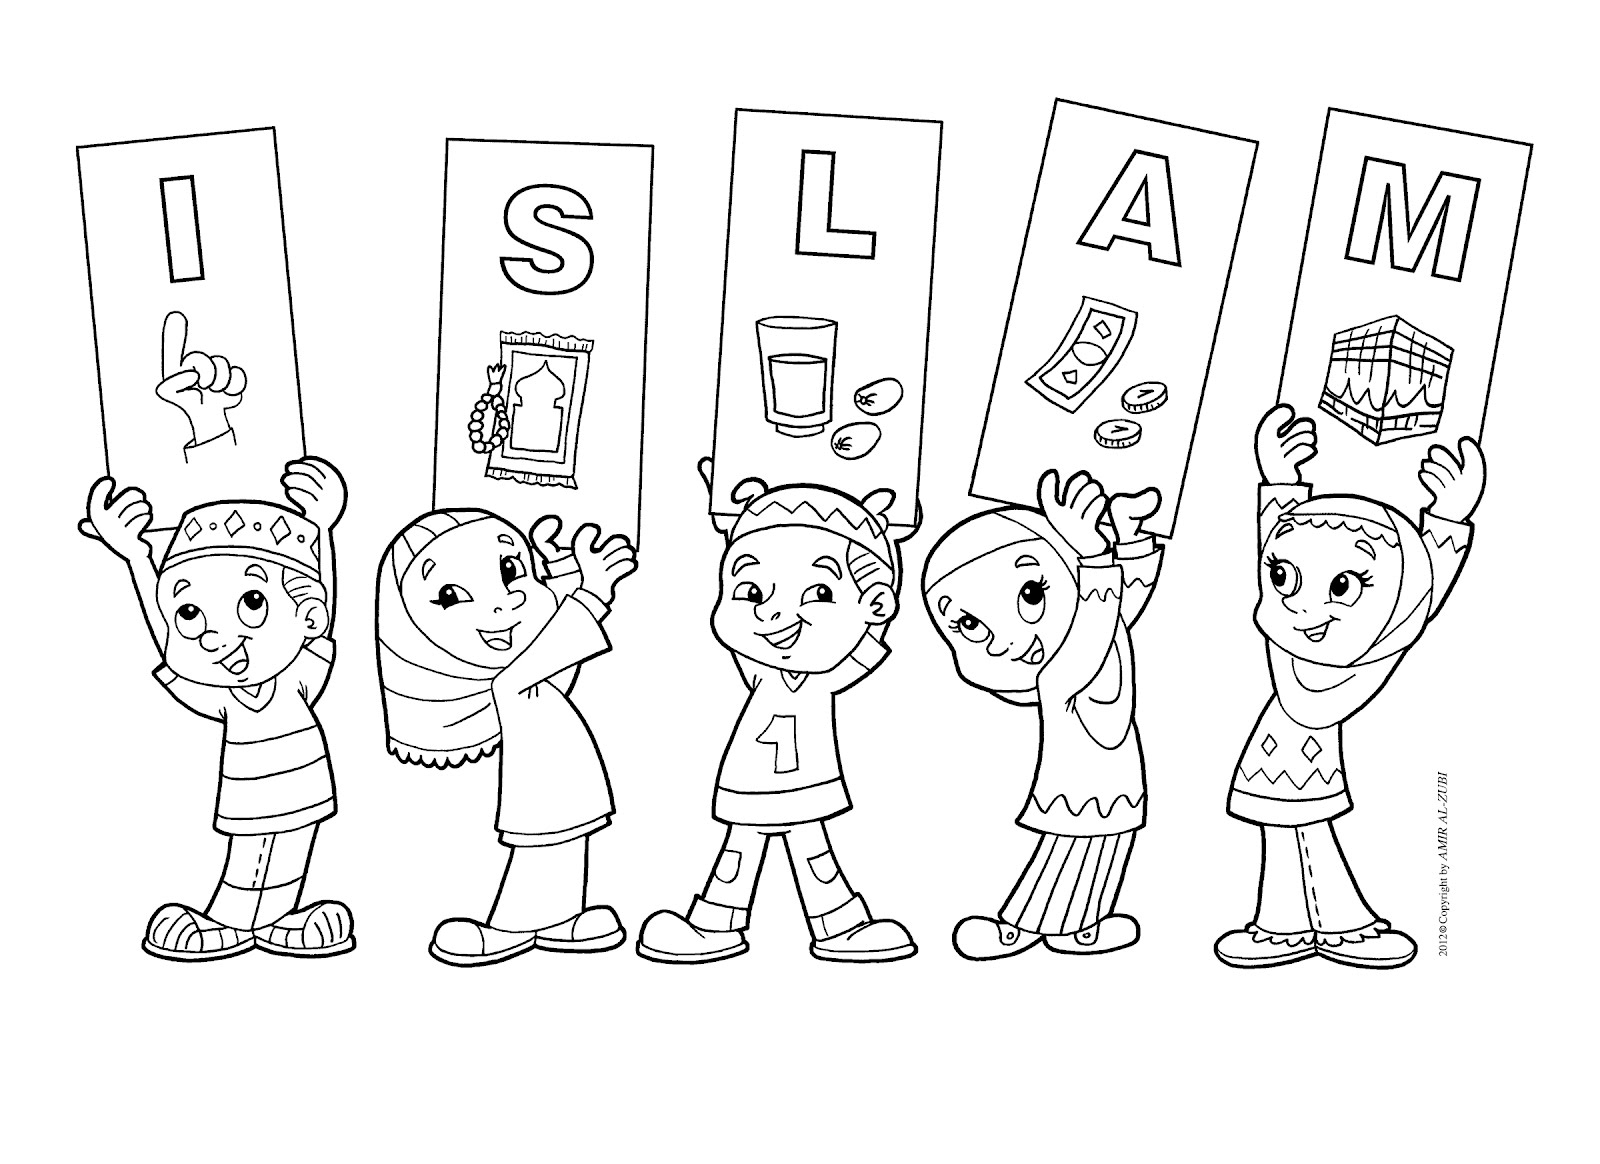 New Muslim Kids: ISLAM - Coloring Pages